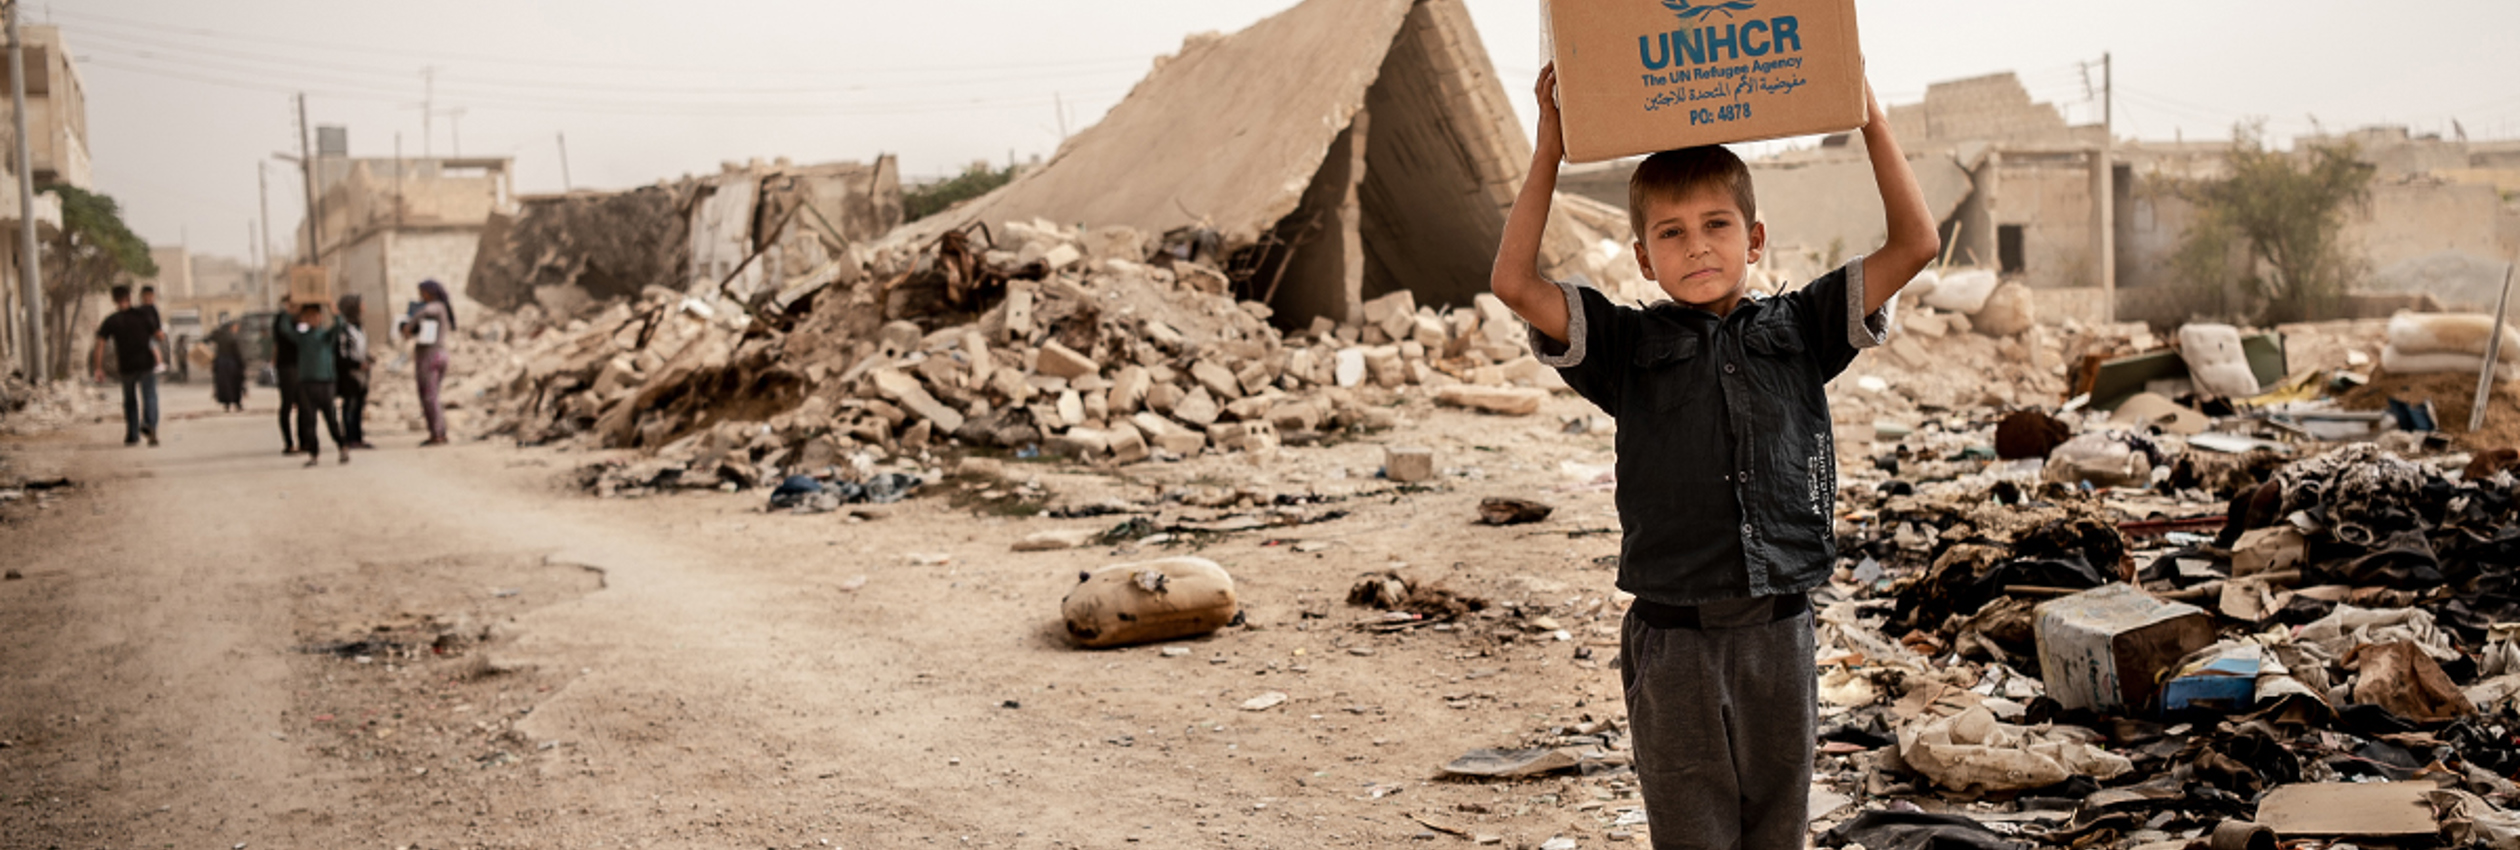 New Collaboration In Support Of Millions Globally Displaced/ © UNHCR/Antwan Chnkdji